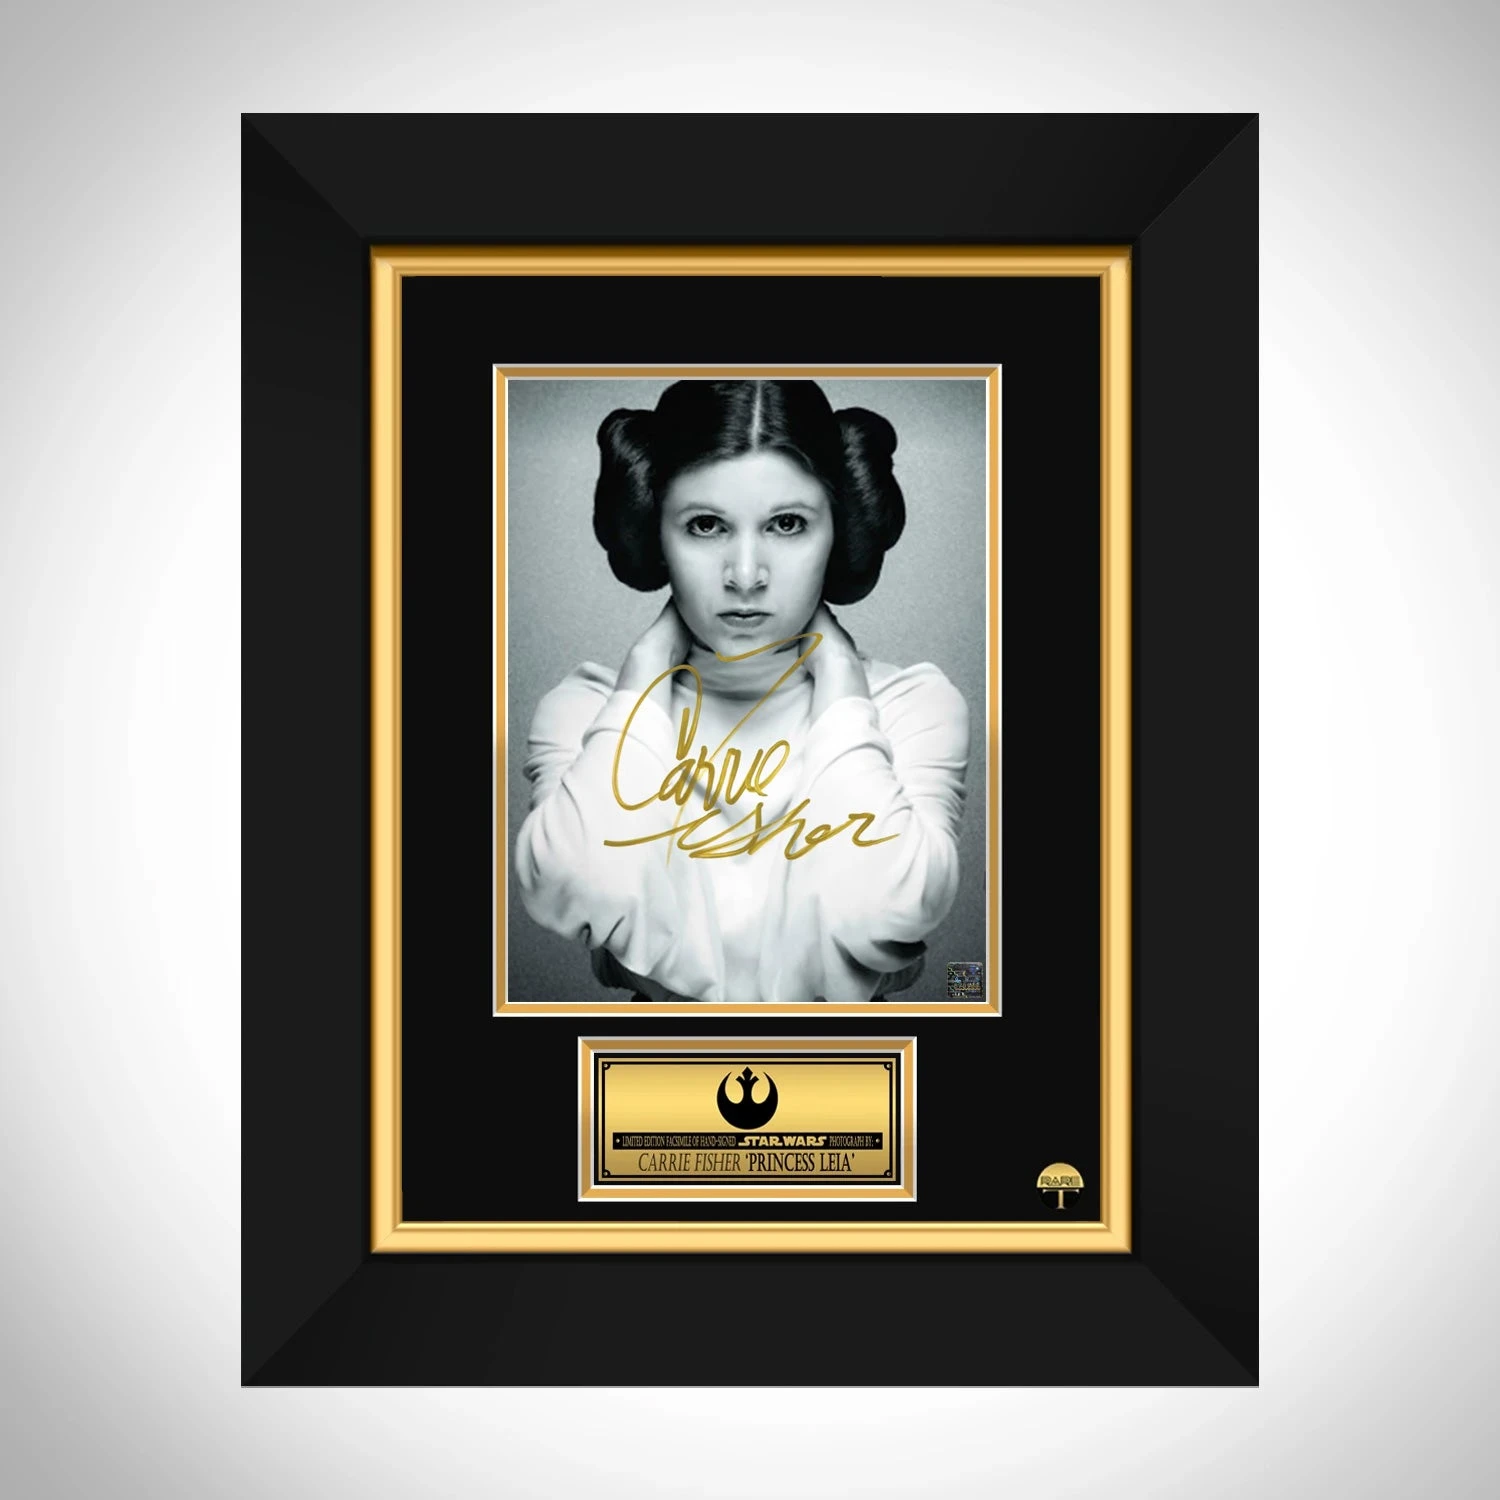 Carrie fisher bw frame thumb200